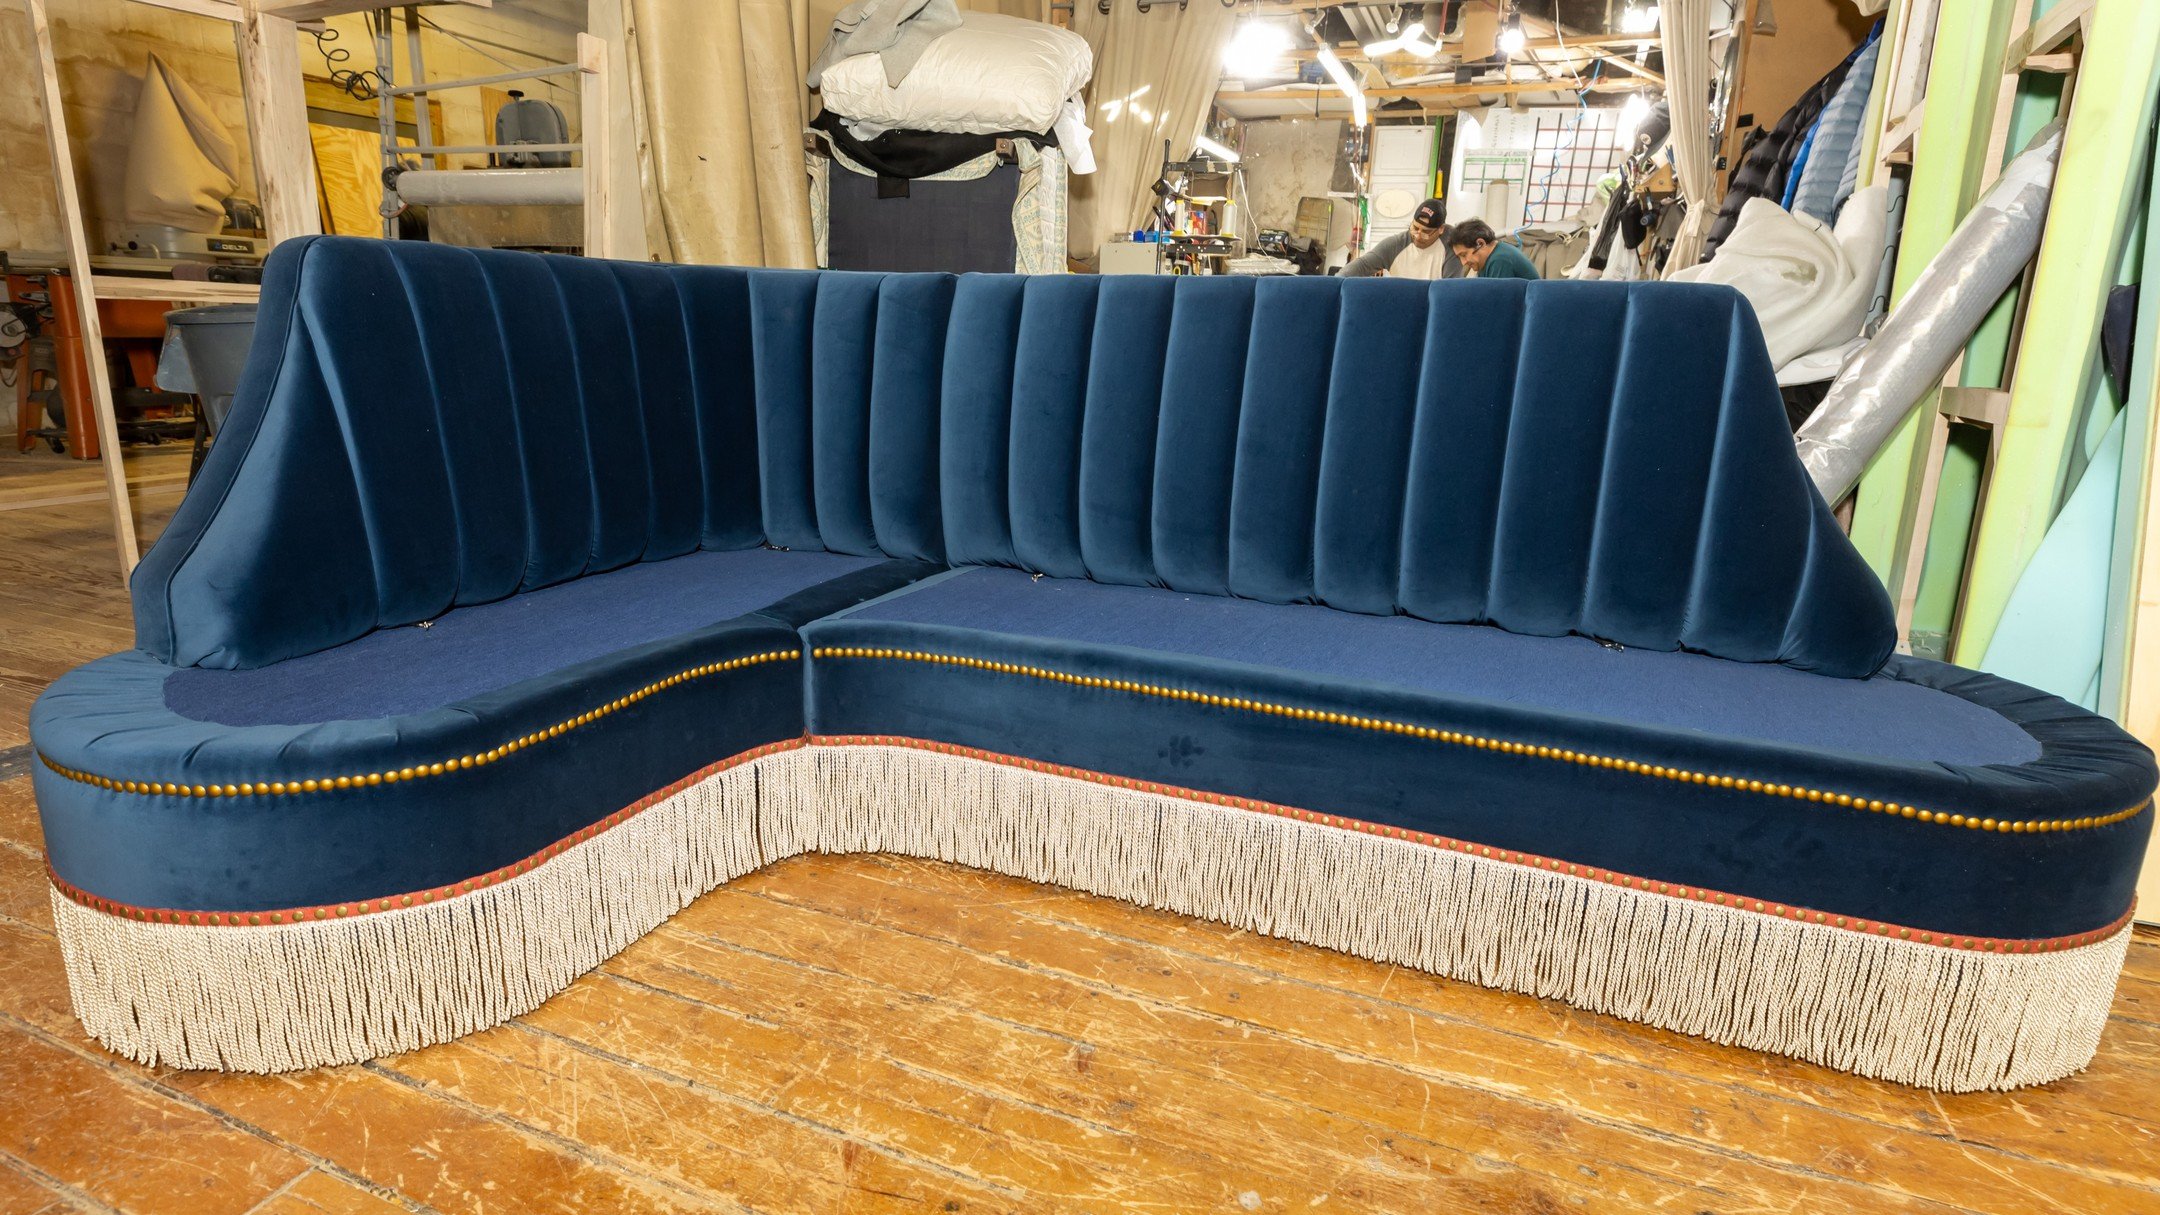 Channeled, nail heads, and bullion! Custom built banquette and curved upholstered sofa delivered this week!

#upholstery #upholstered #livingroom #livingroomdecor #livingroomdesign #livingroomideas #homedesign #homedecor #interiordesign #interiors #i